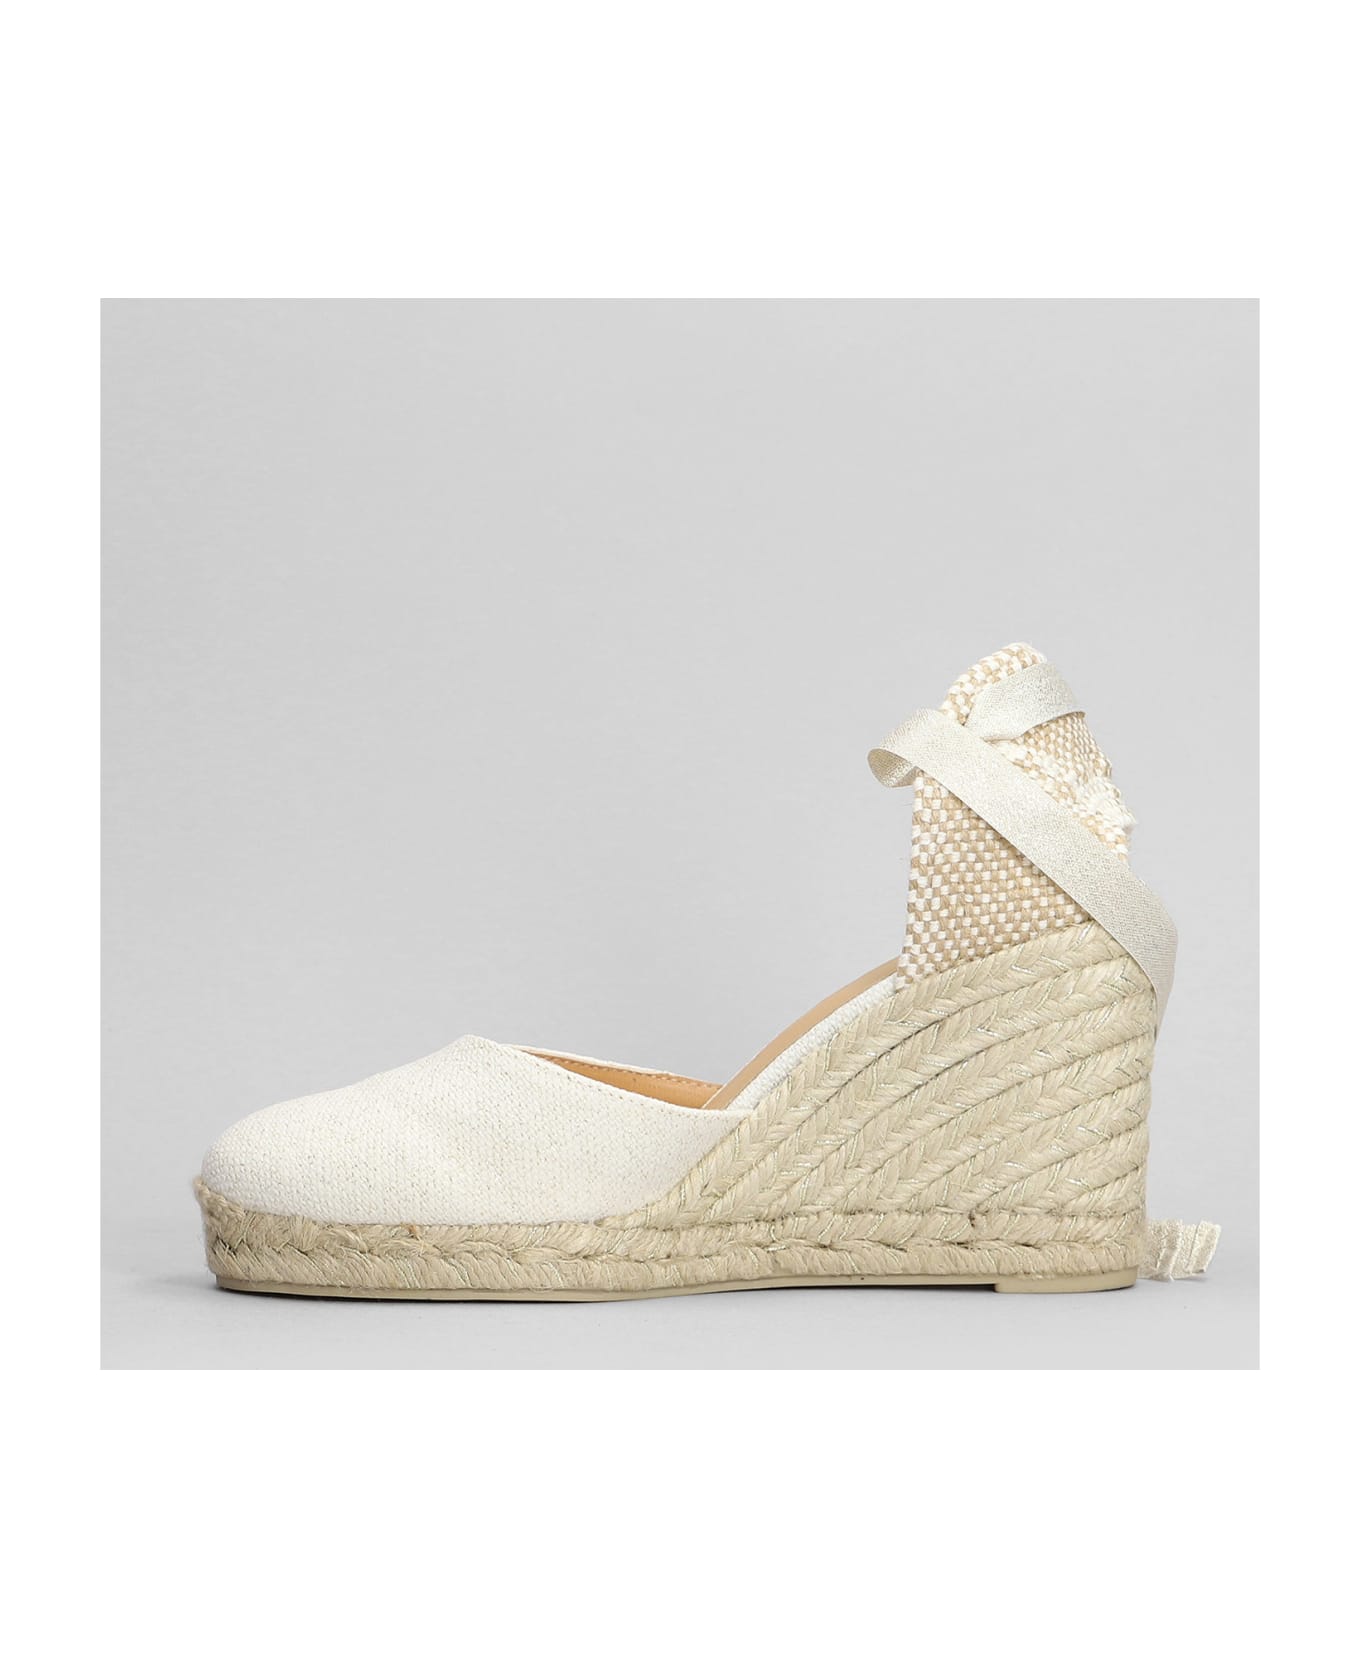 Castañer Carina-8-032 Wedges In White Canvas - white